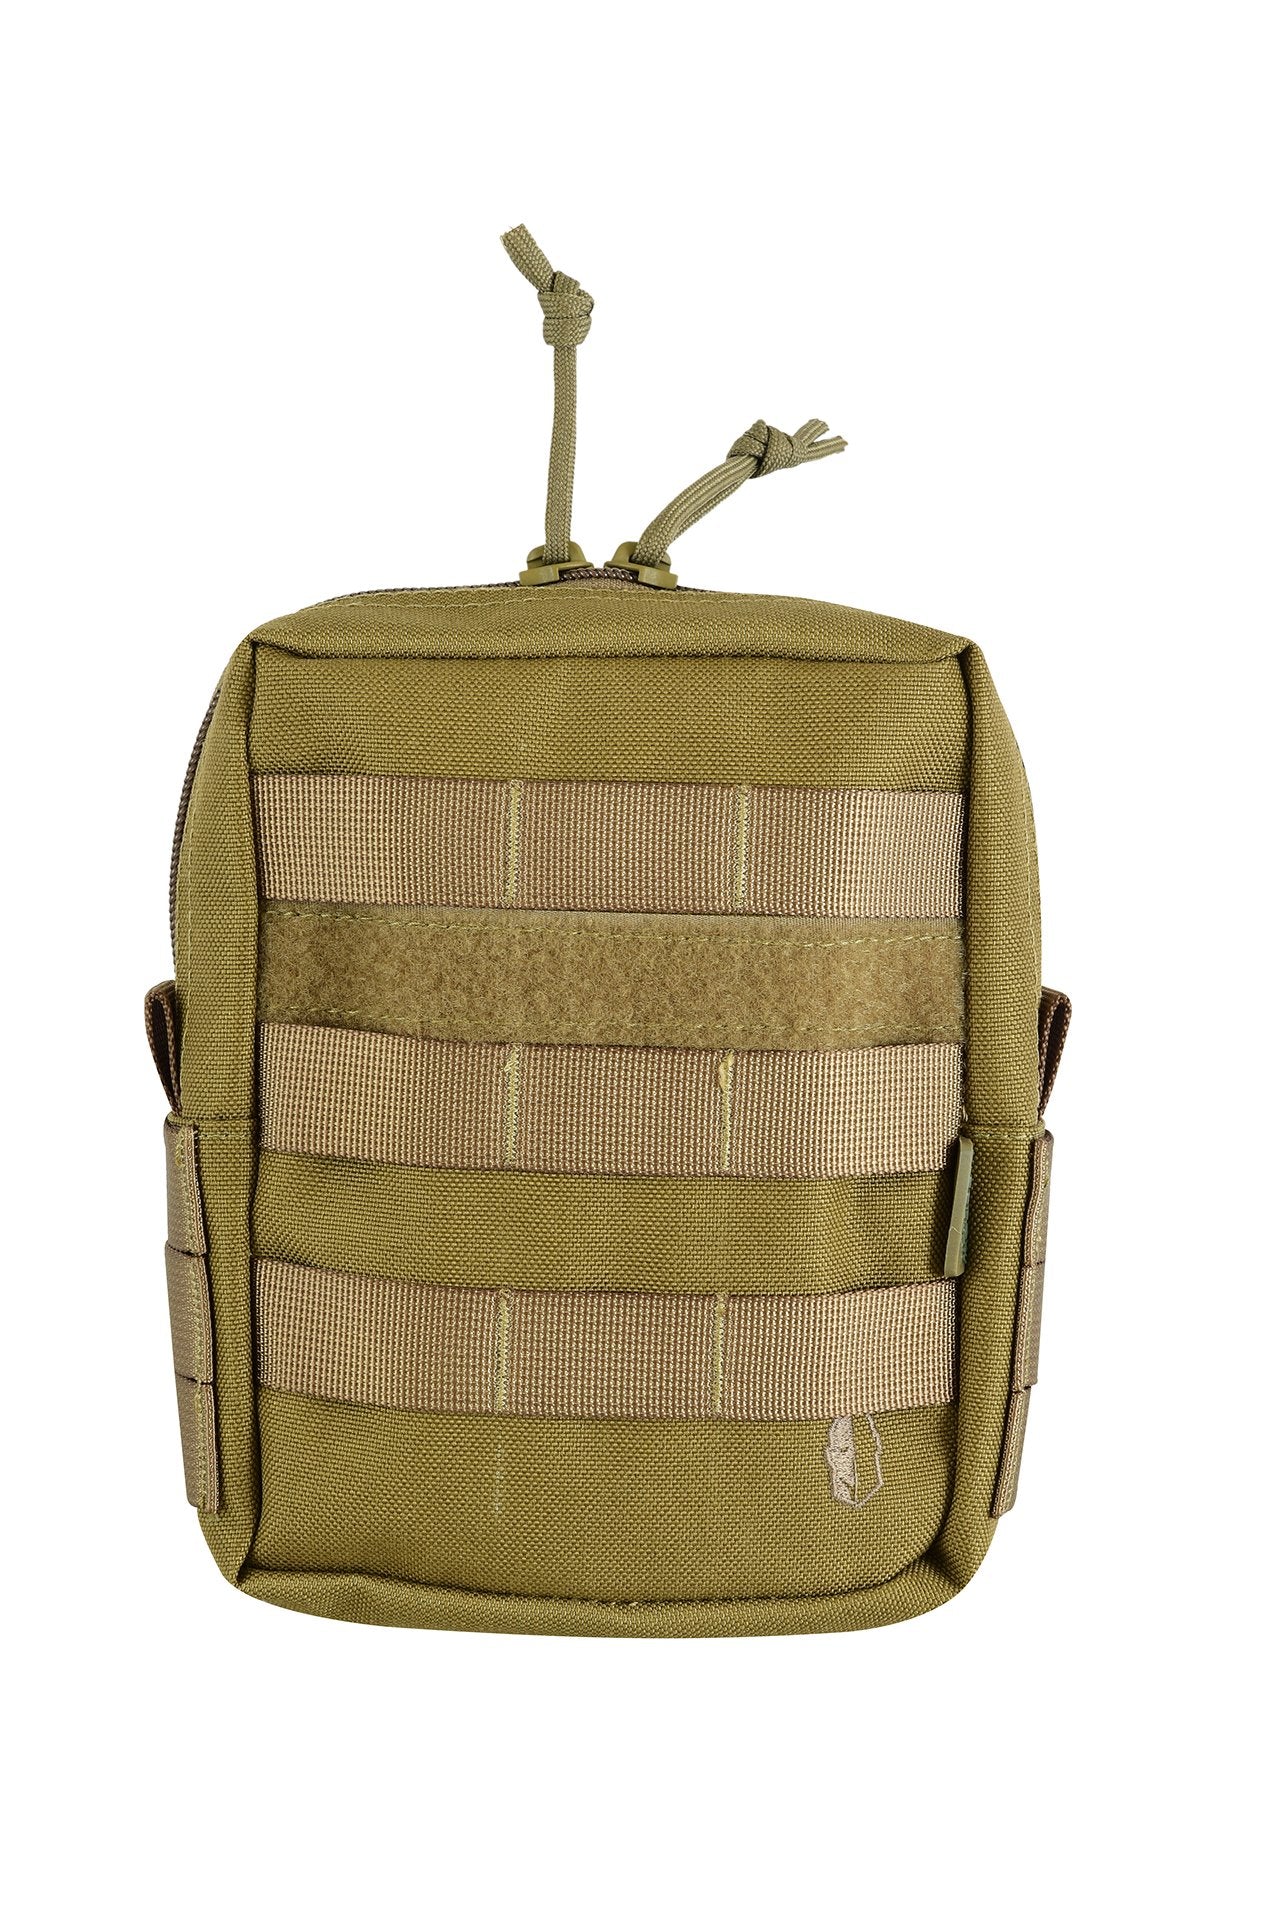 SHE-23034 MEDIUM UTILITY POUCH COYOTE